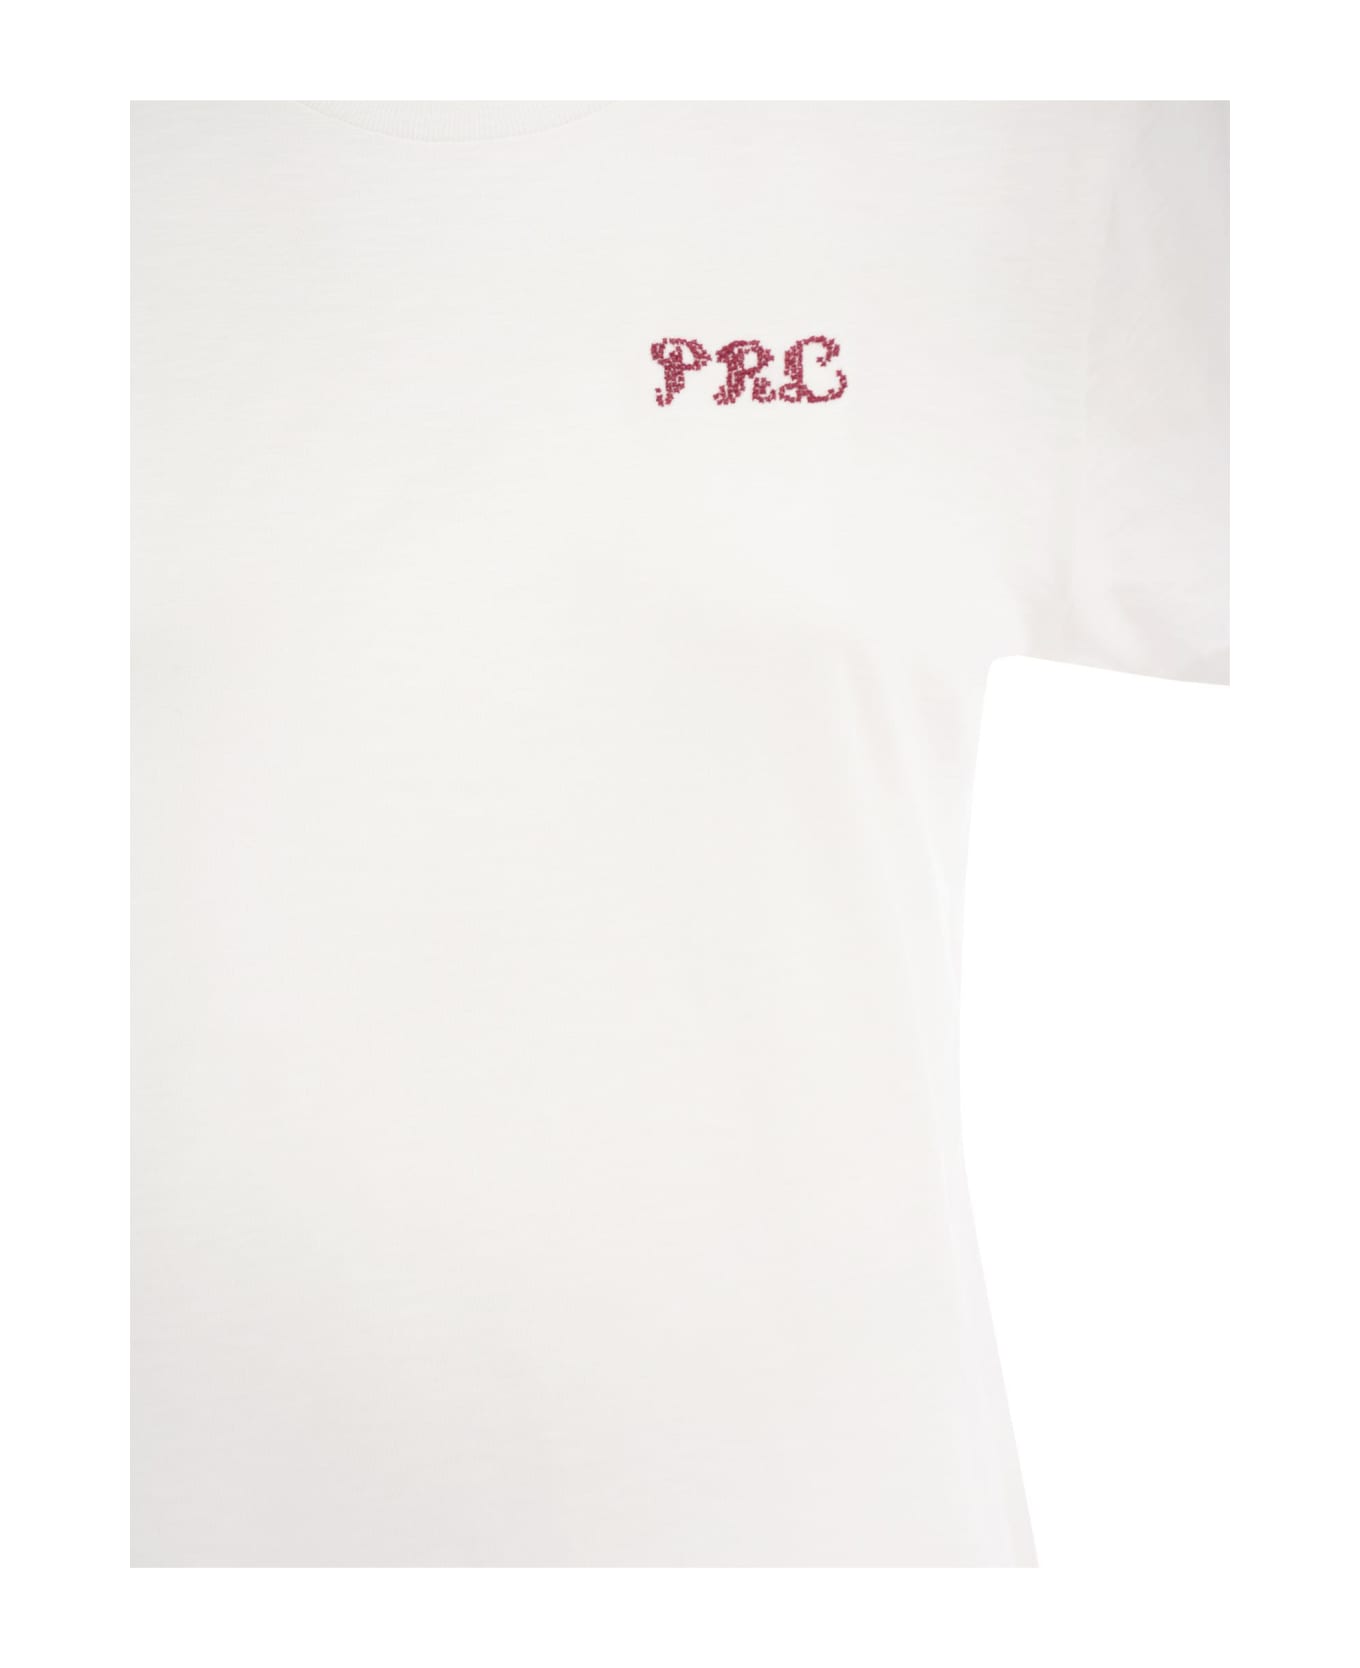 Ralph Lauren Crew-neck T-shirt With Embroidery - White